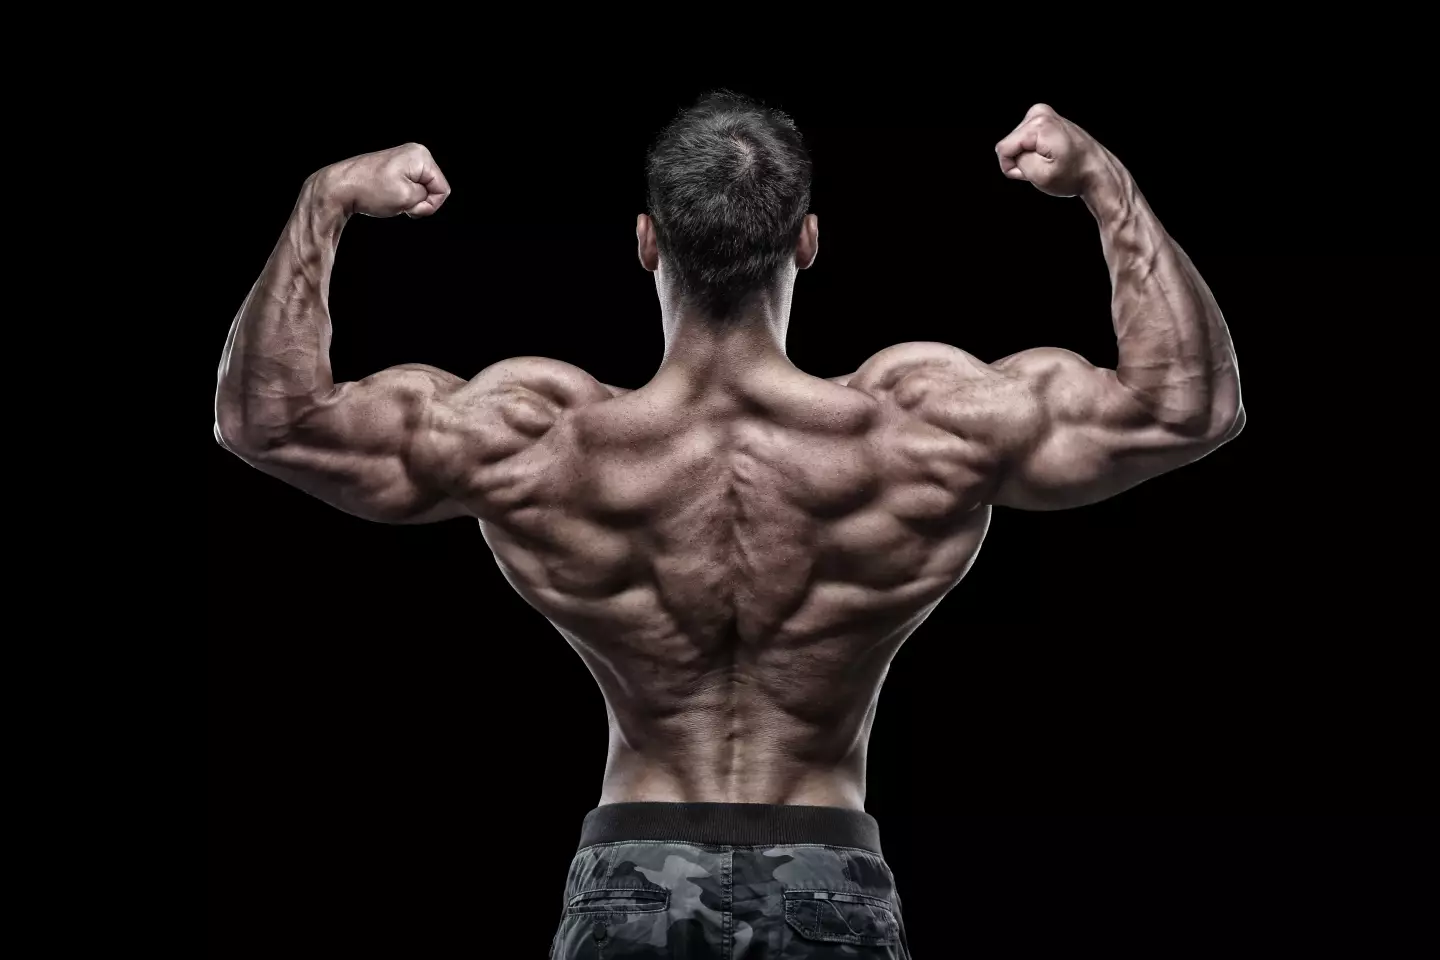 Having large muscle mass doesn't necessarily mean strength.